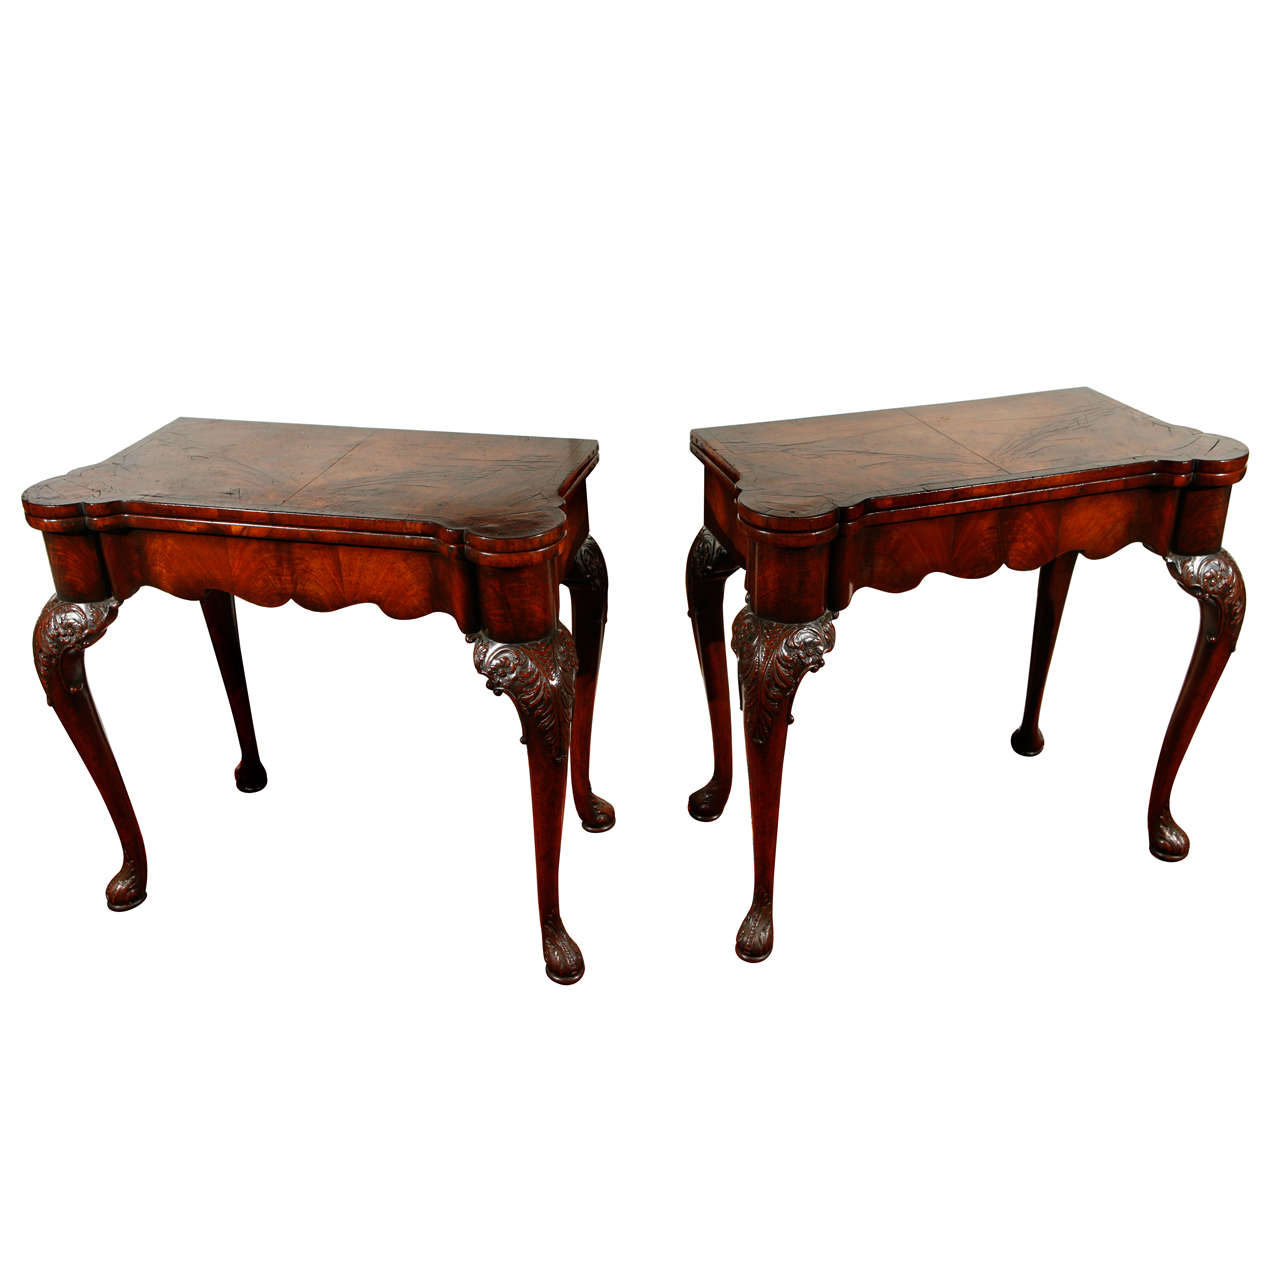 English Games Tables with Needlepoint Interiors For Sale